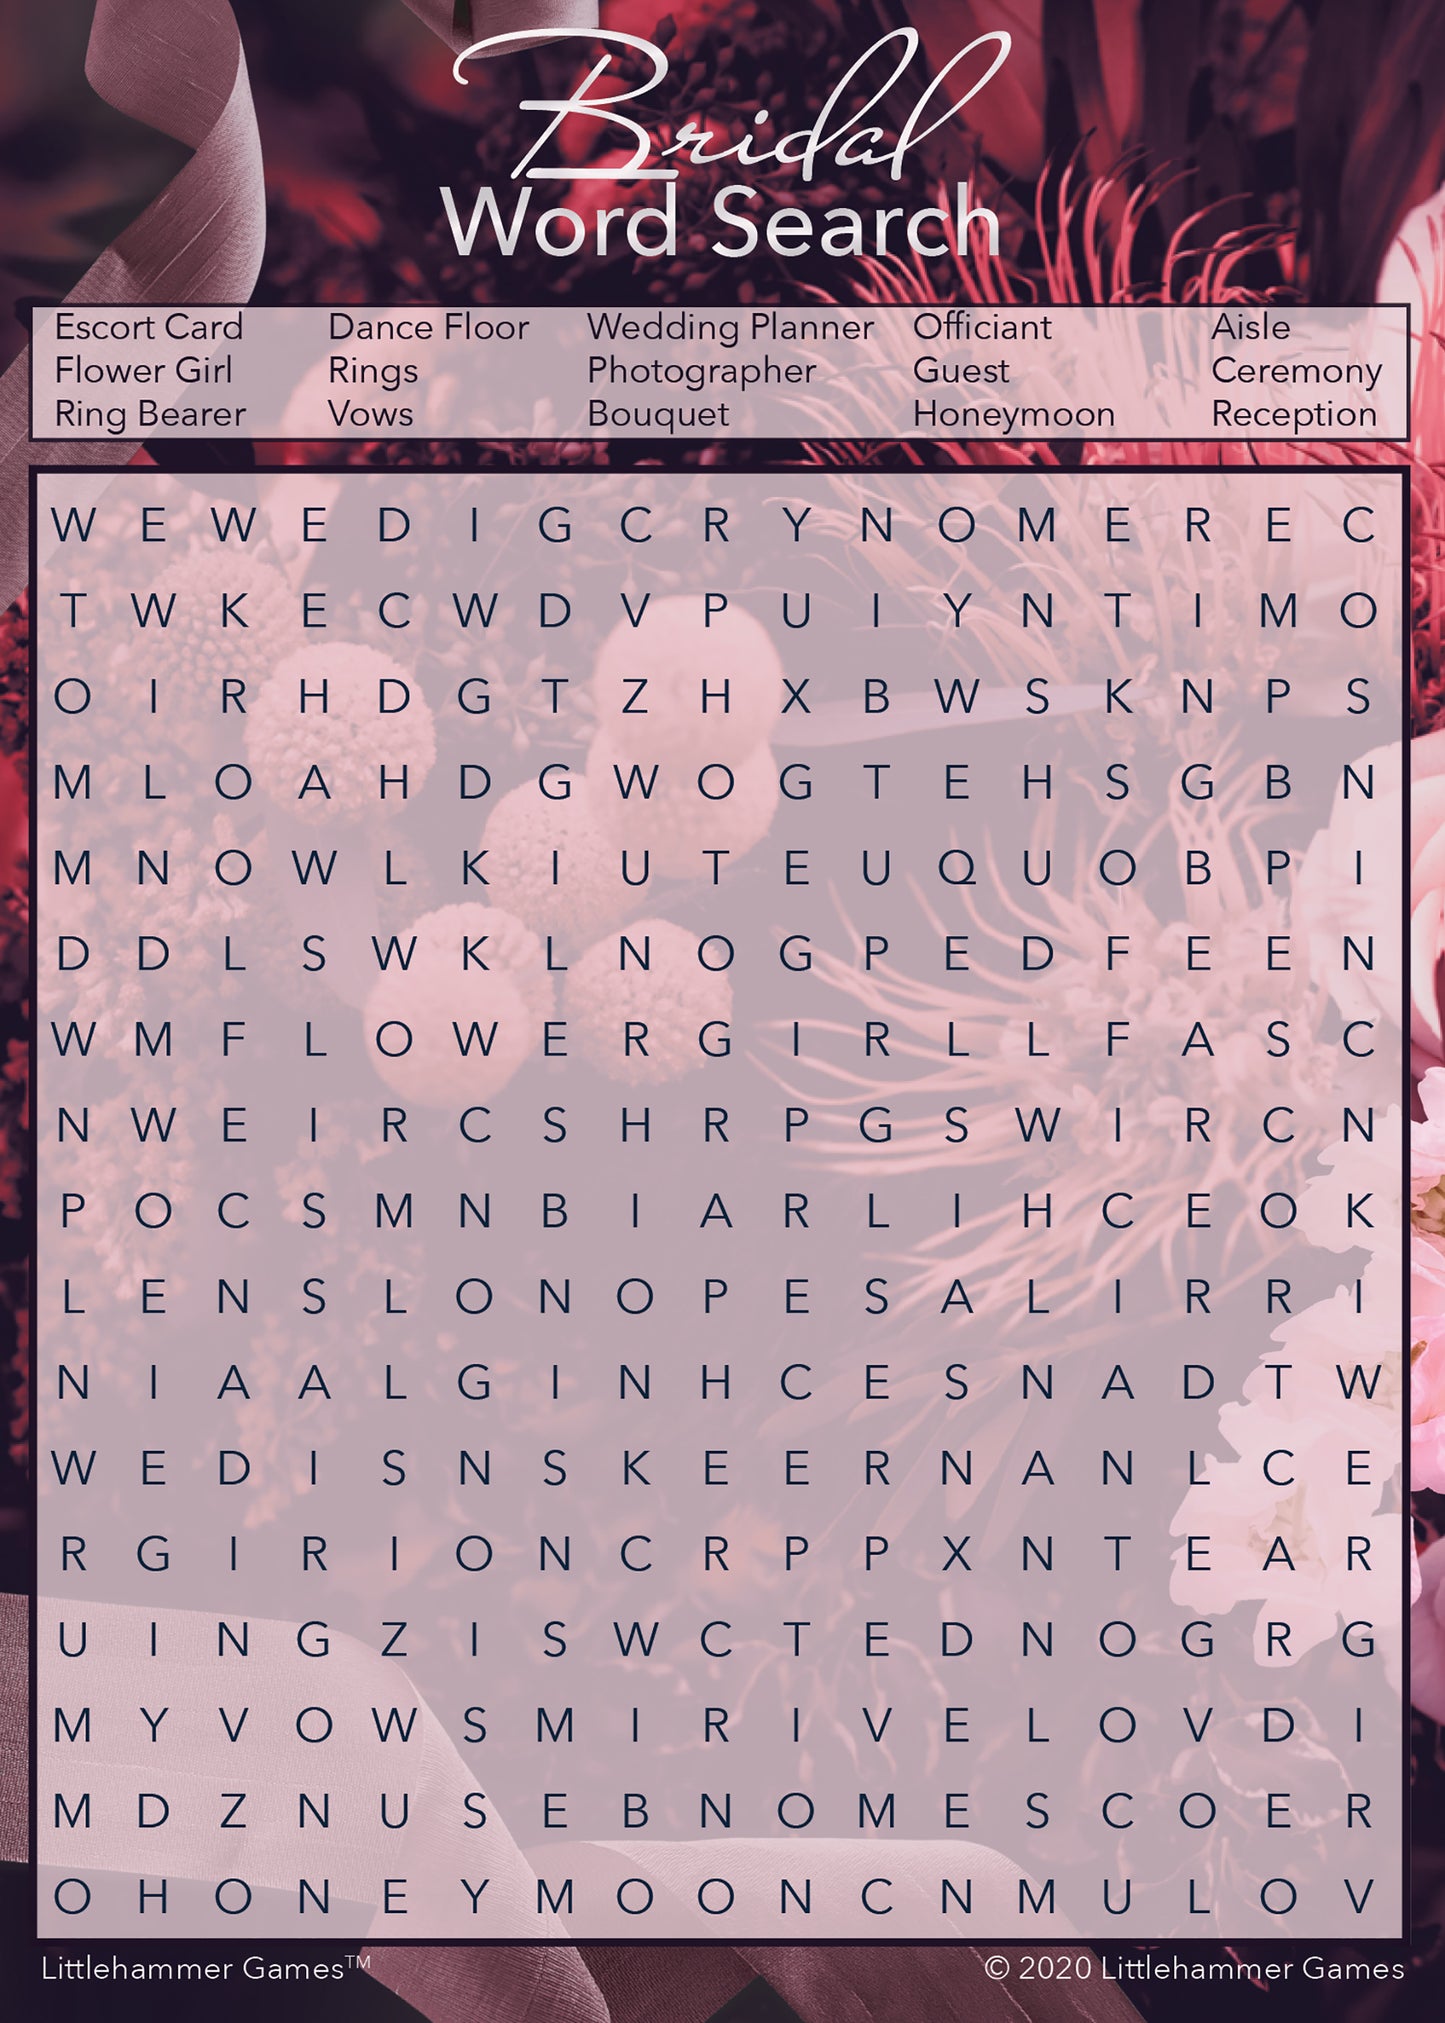 Bridal Word Search game card with a dark floral background